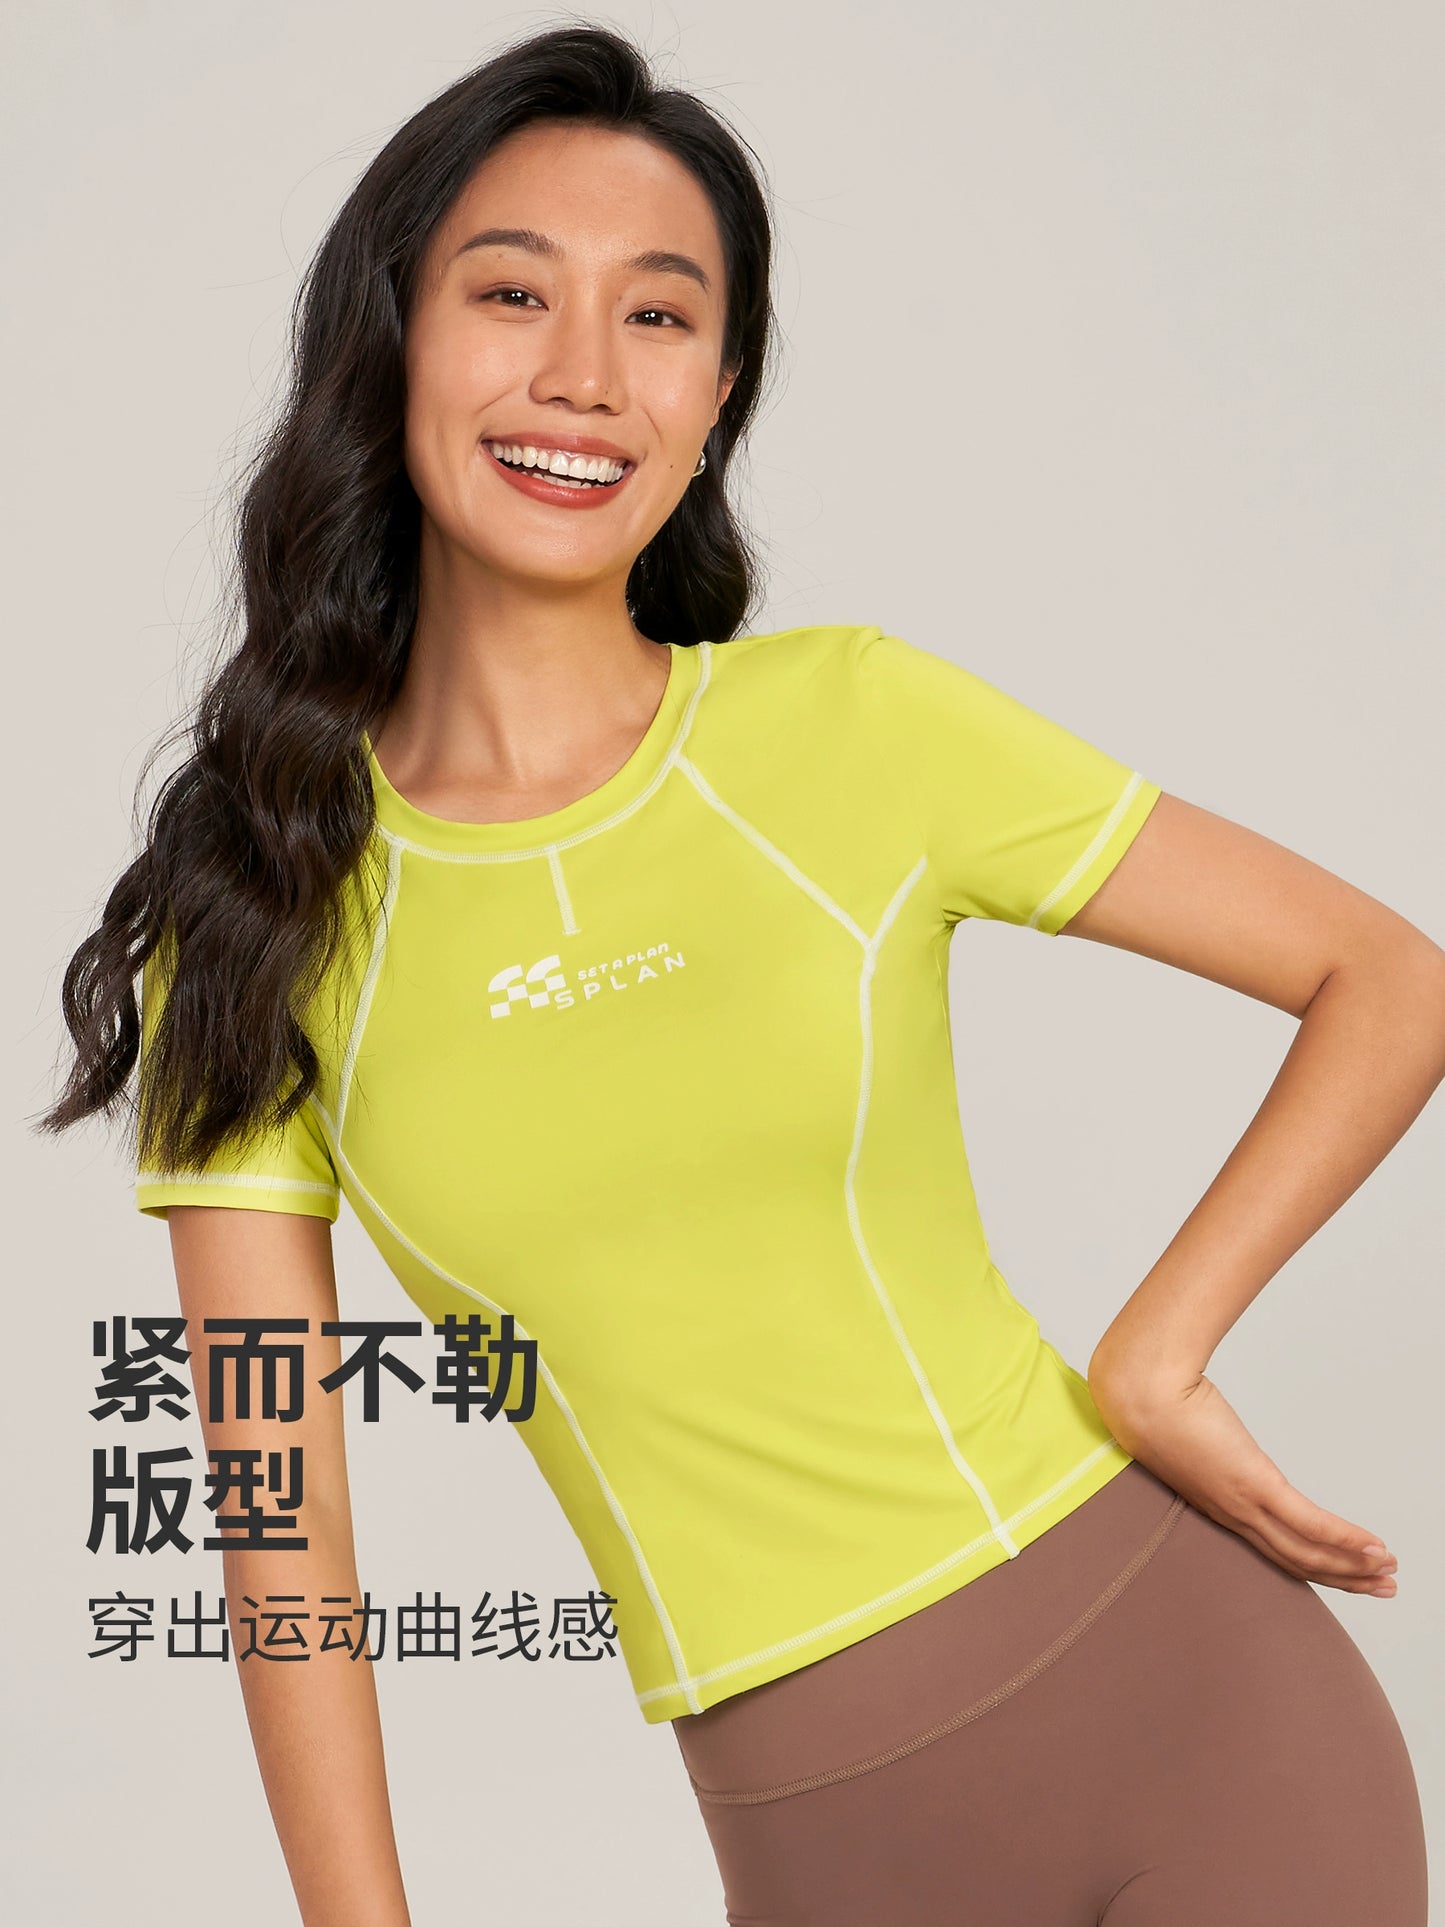 Tight Cycling Clothes Running Training Quick-Drying Women's Short Sleeve